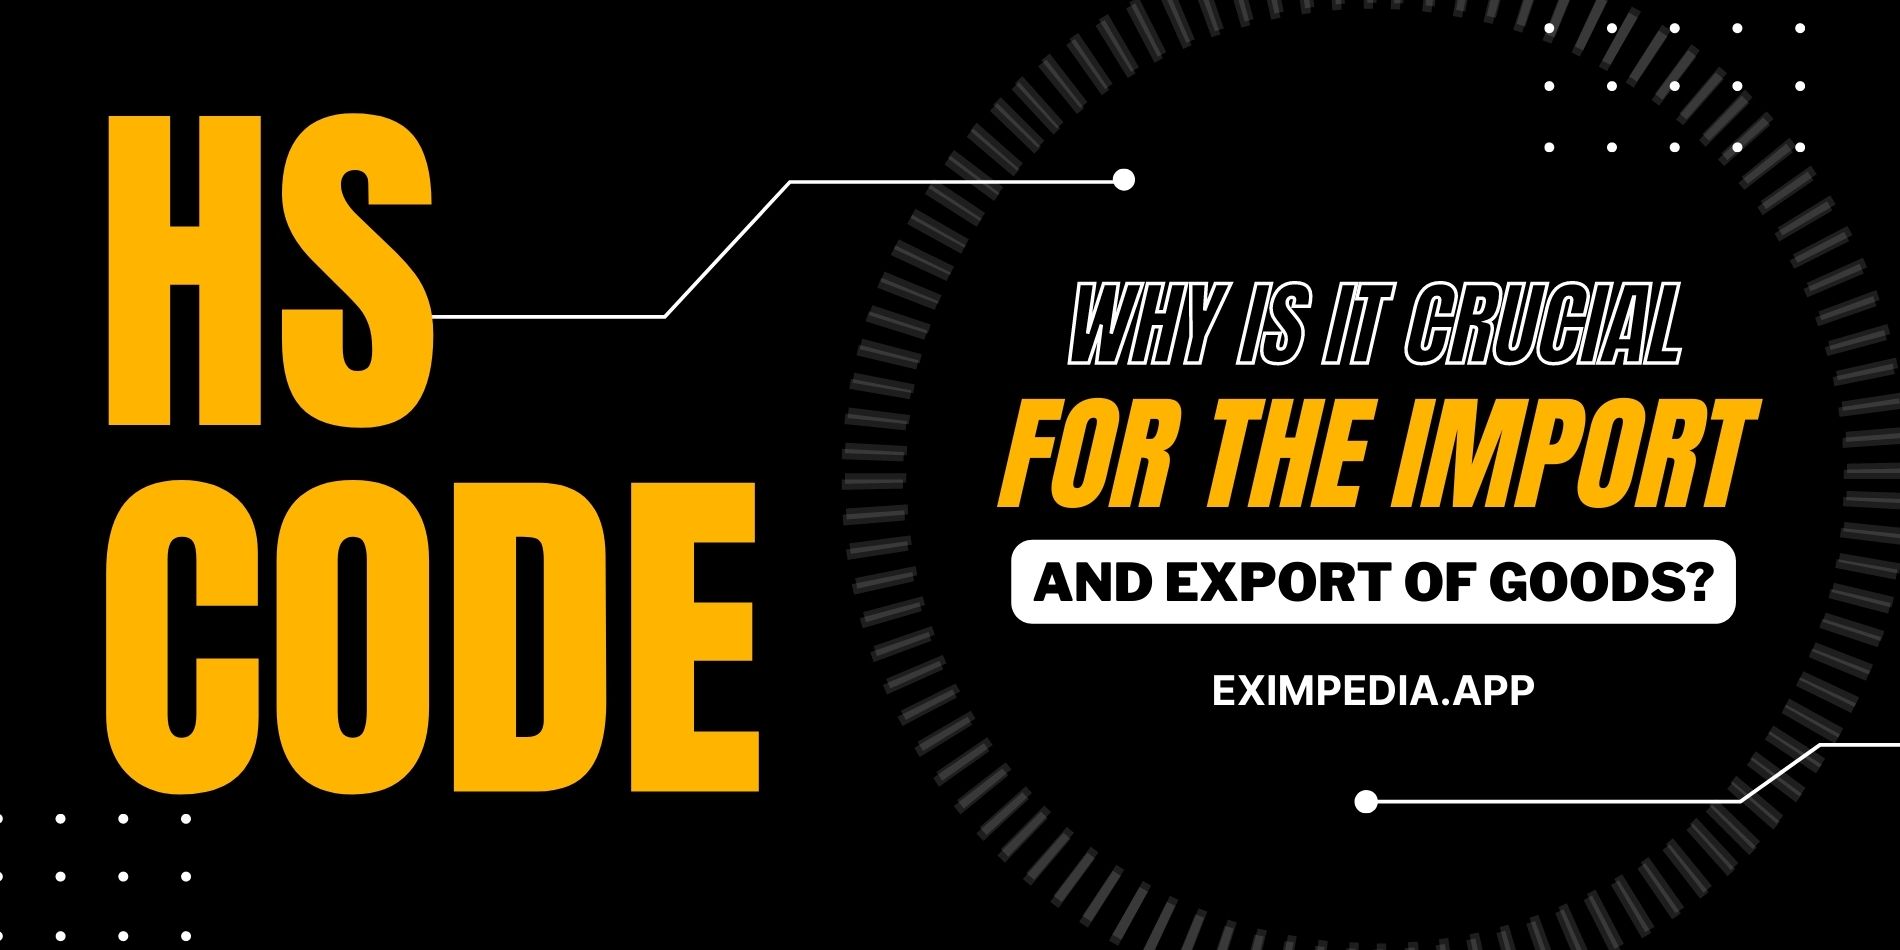 What is HS Code? Why is it crucial for the import and export of goods?